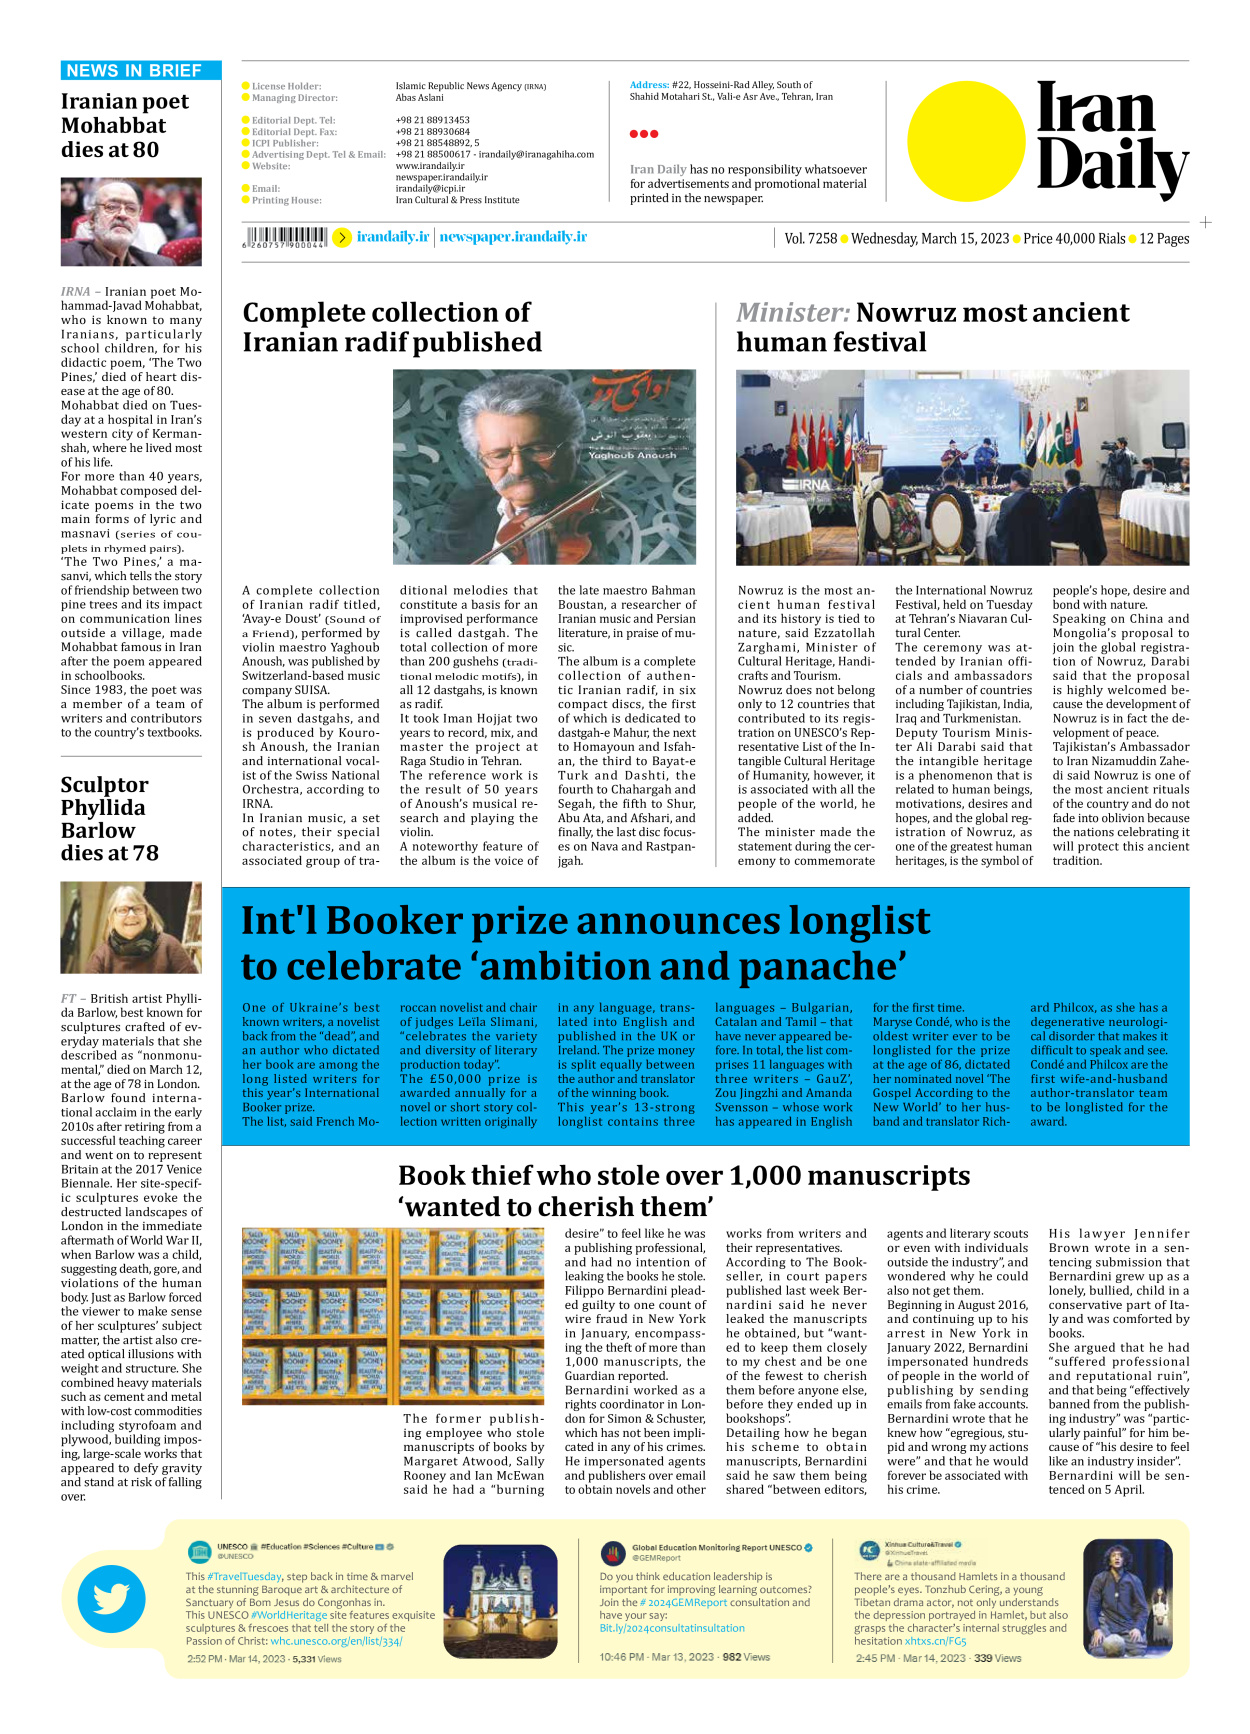 Iran Daily - Number Seven Thousand Two Hundred and Fifty Eight - 15 March 2023 - Page 12